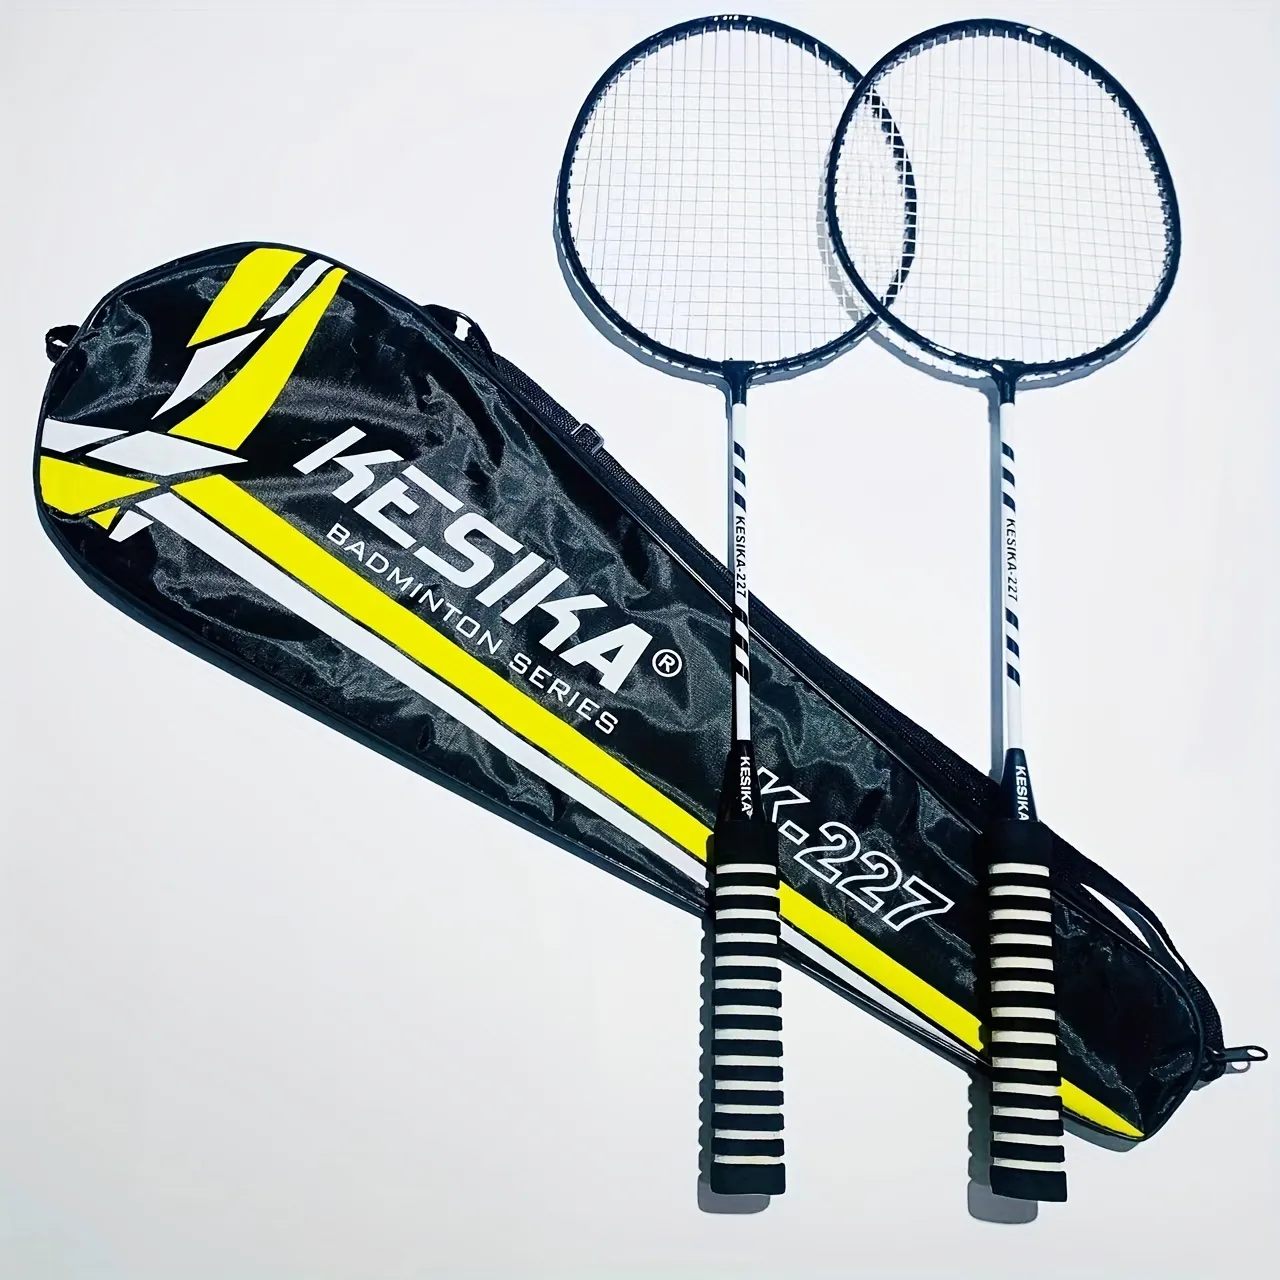 Durable Badminton Racket Set For Youth And Adults - Includes Two Rackets For Training And Recreation